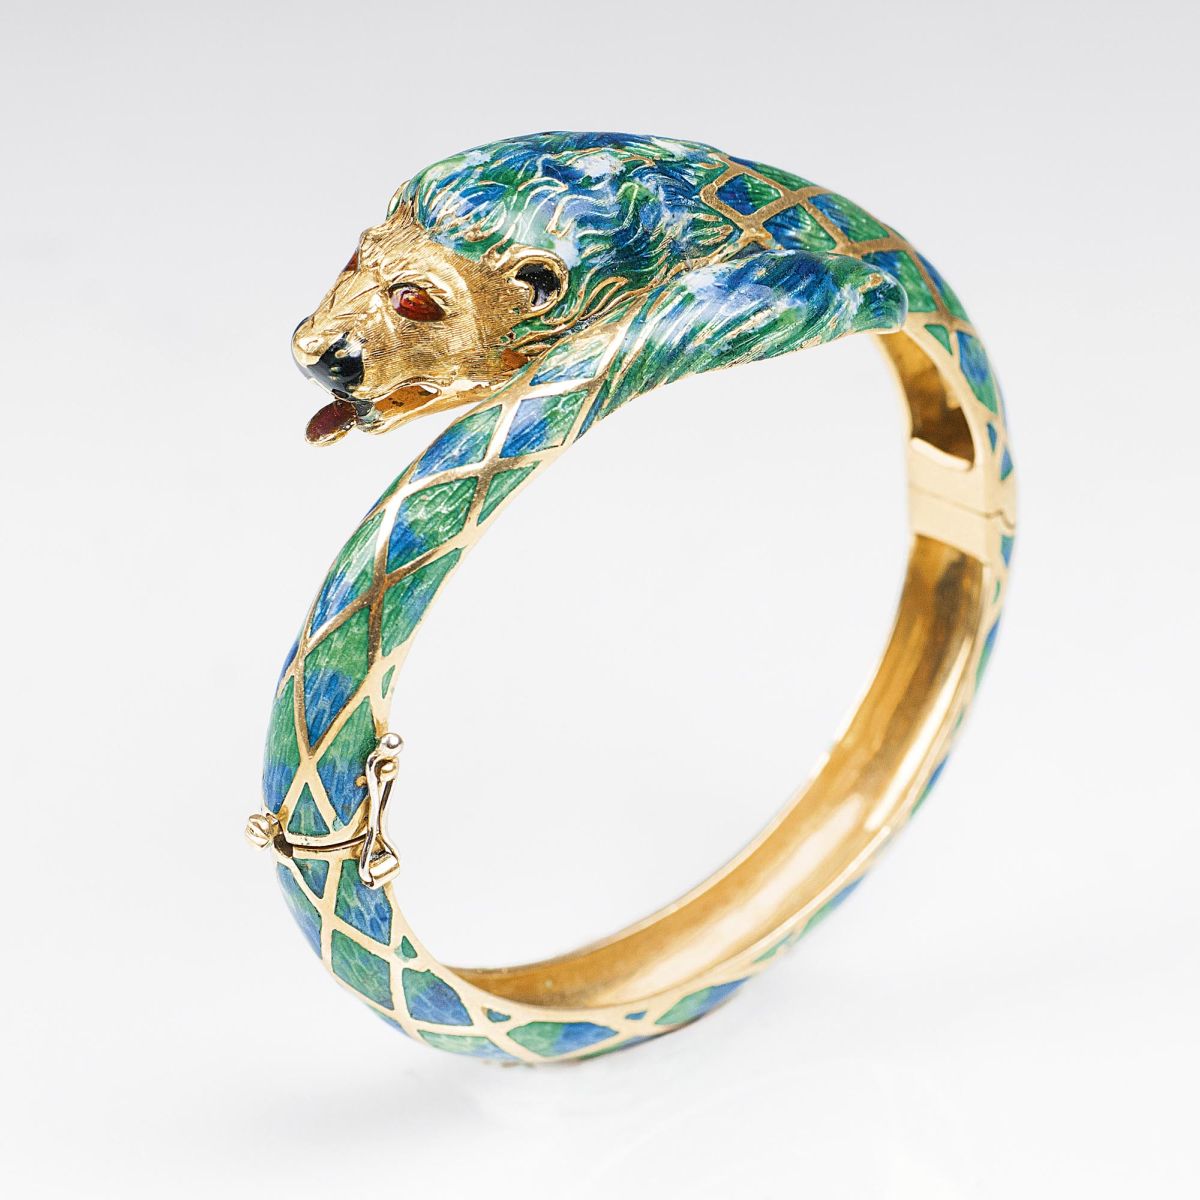 A Gold Bangle Bracelet with Head of Lion